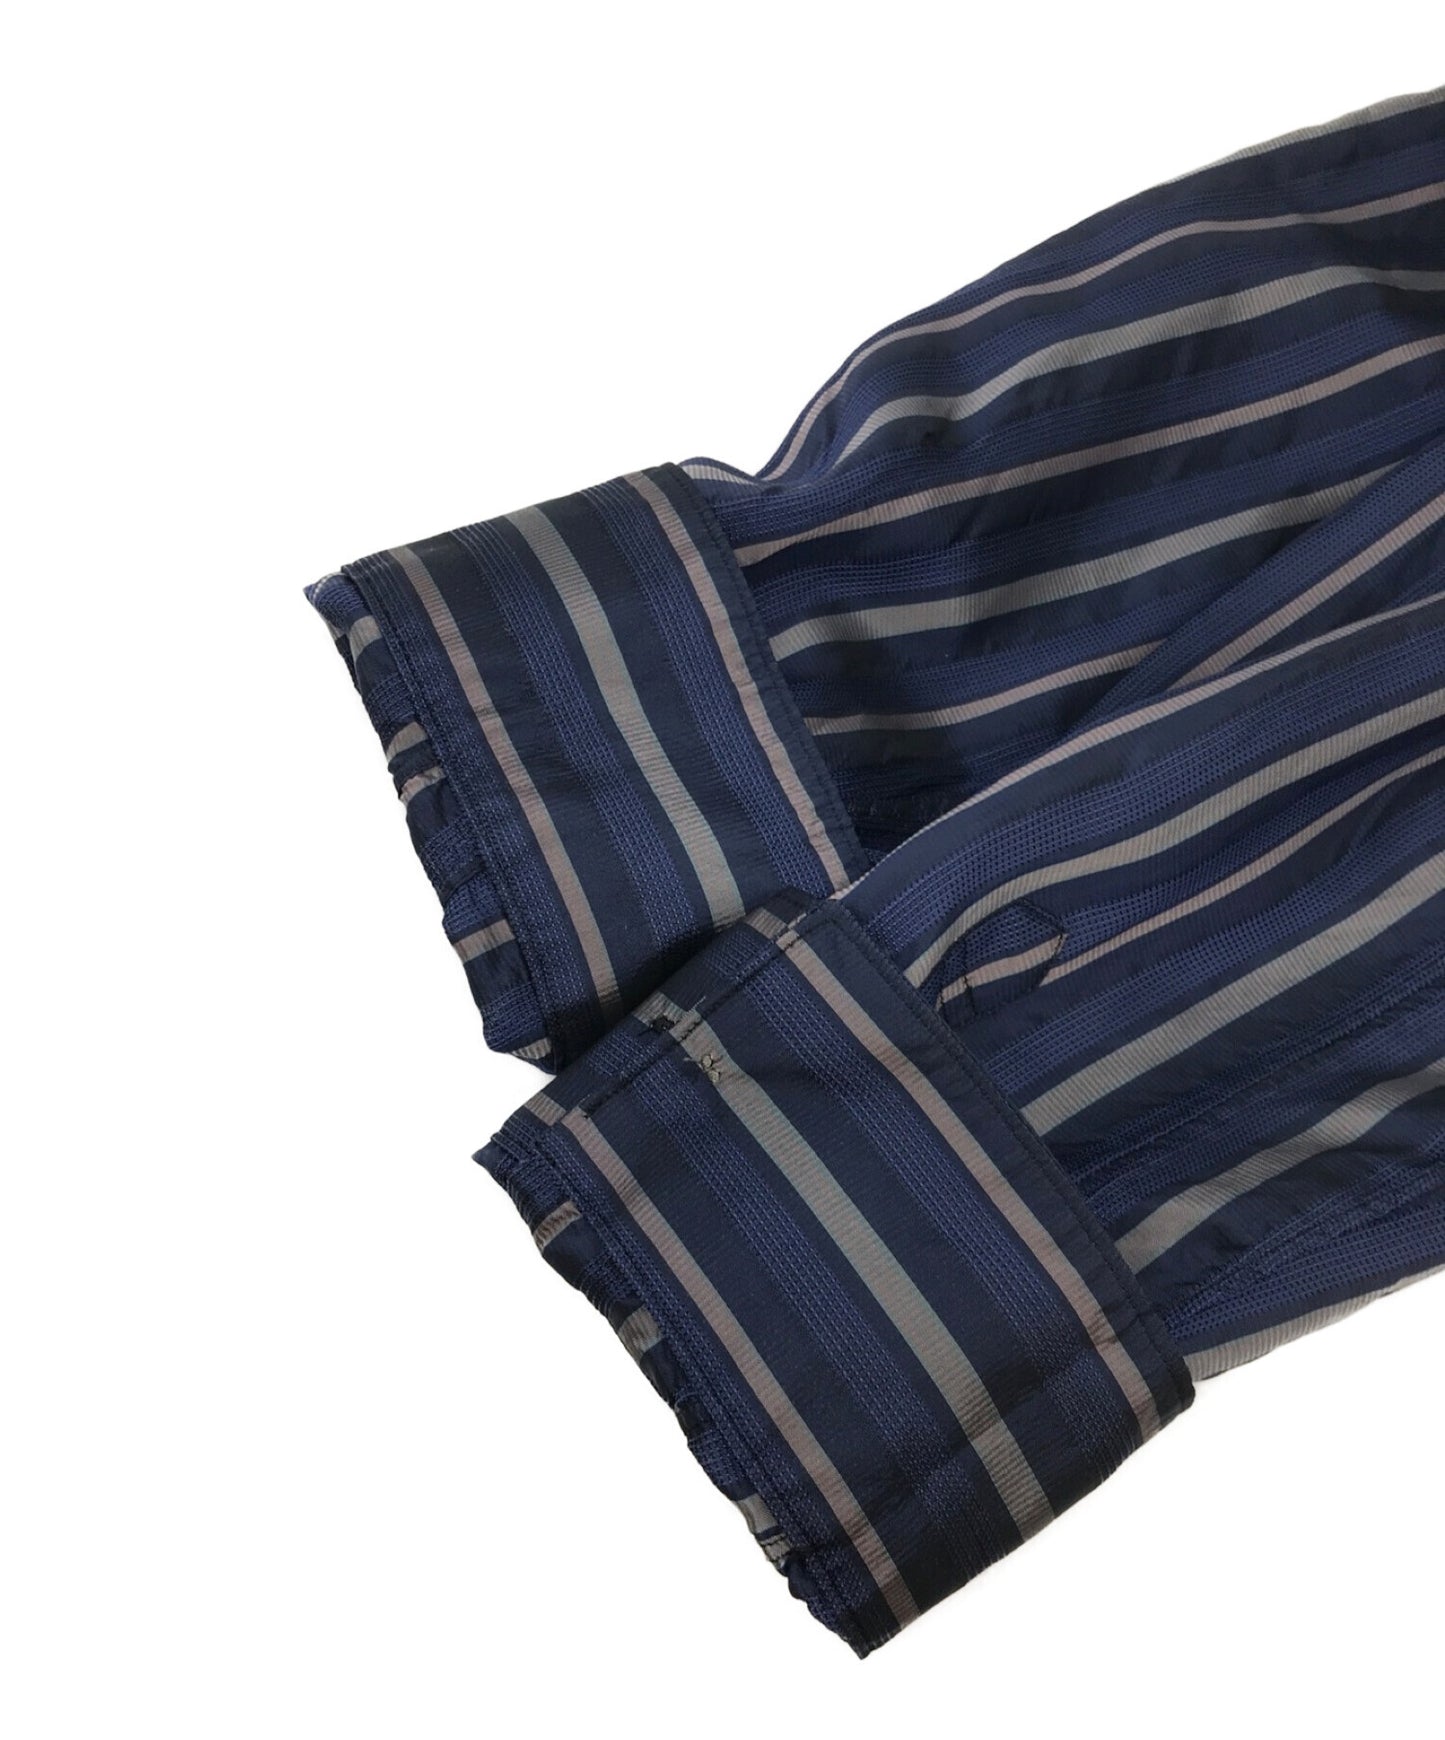 COMME des GARCONS SHIRT Striped Switched Shirt Striped Shirt Long Sleeve Shirt Shirt S27065